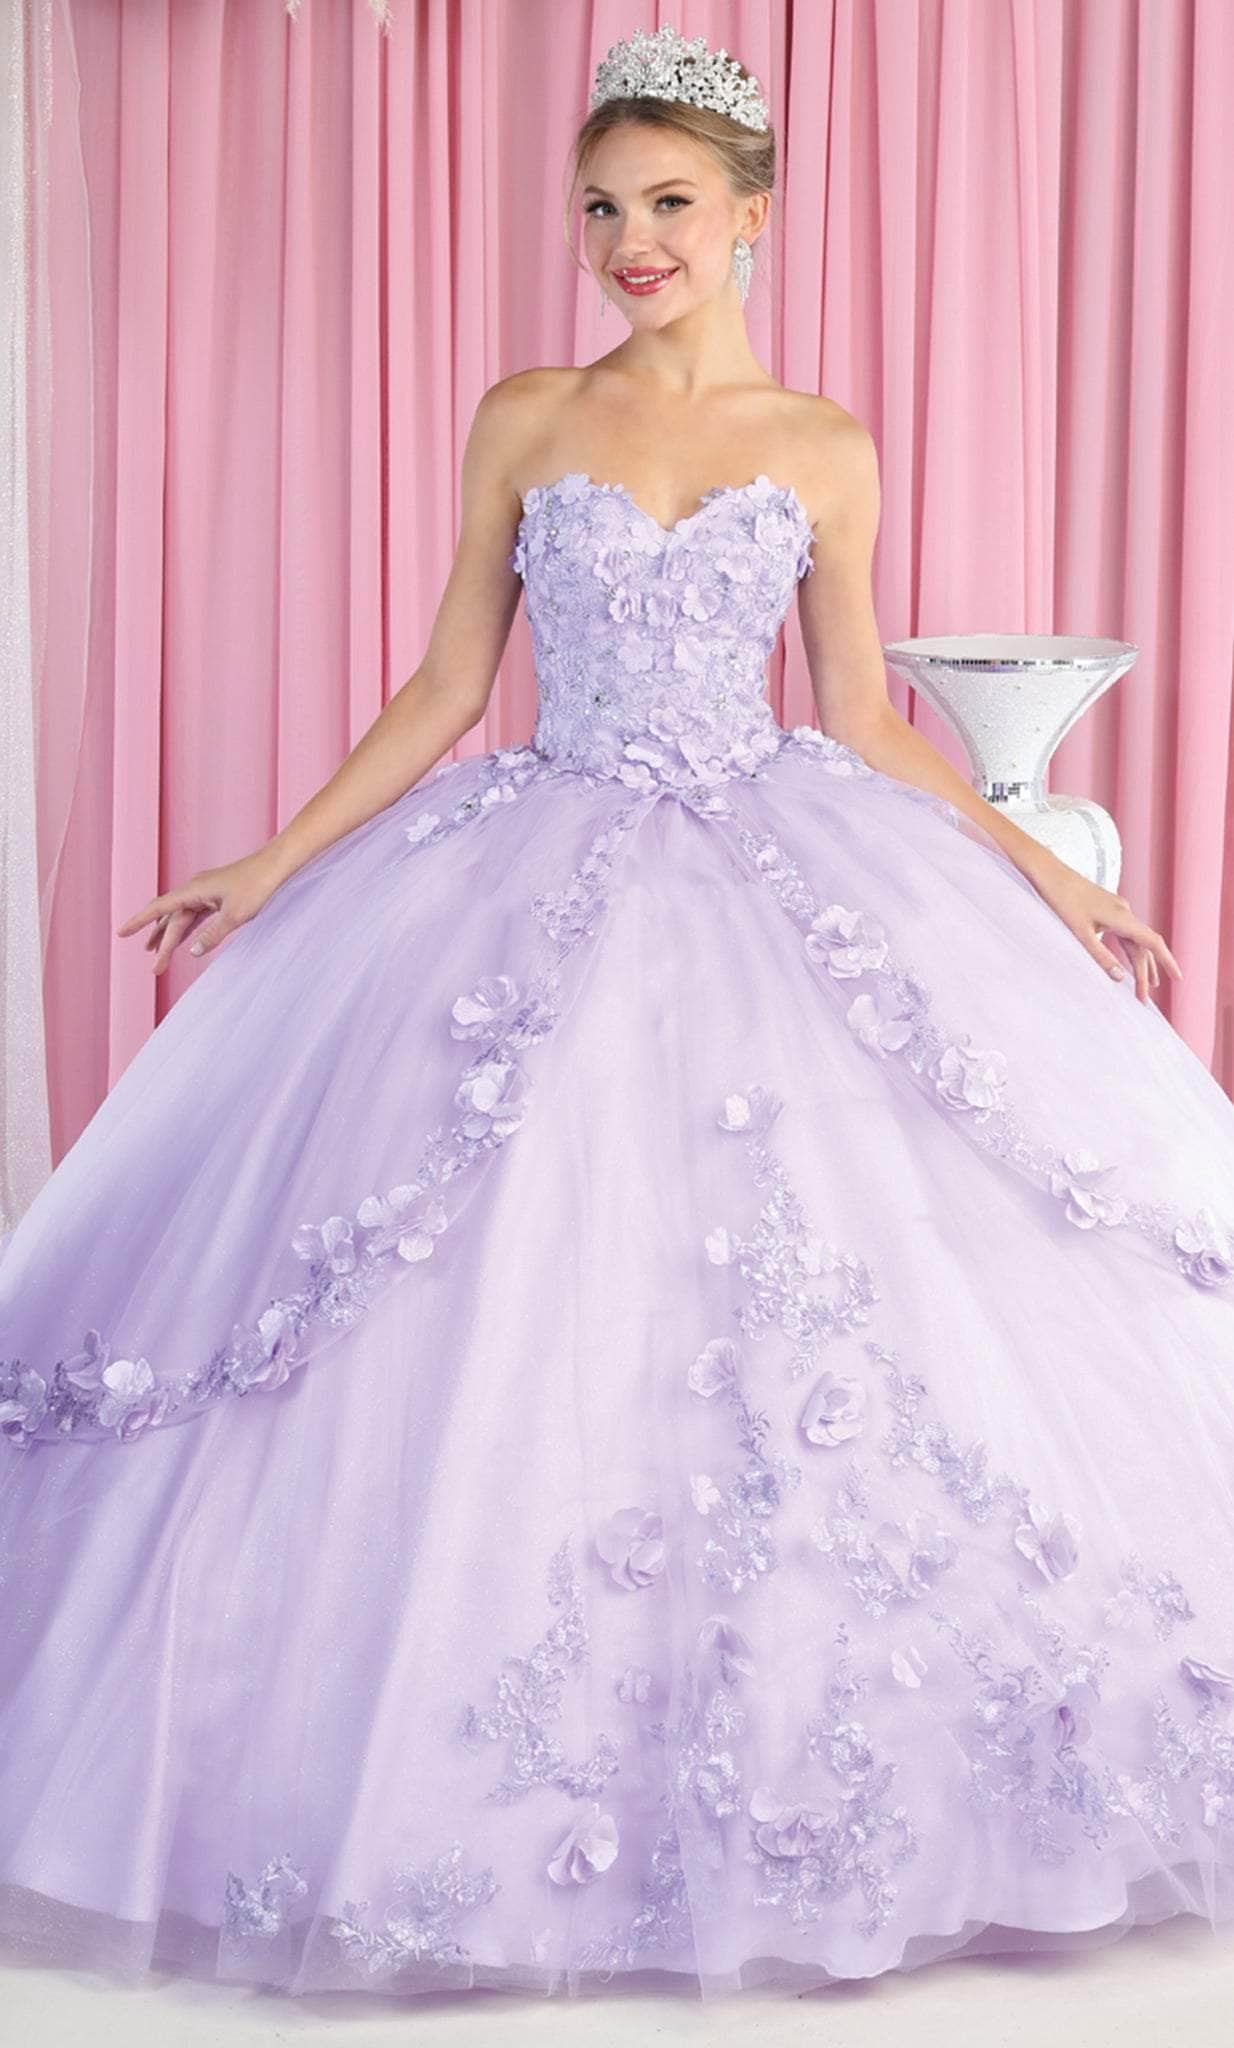 May Queen LK177 - Sweetheart Quinceanera Ballgown Ball Gowns 4 / Lilac